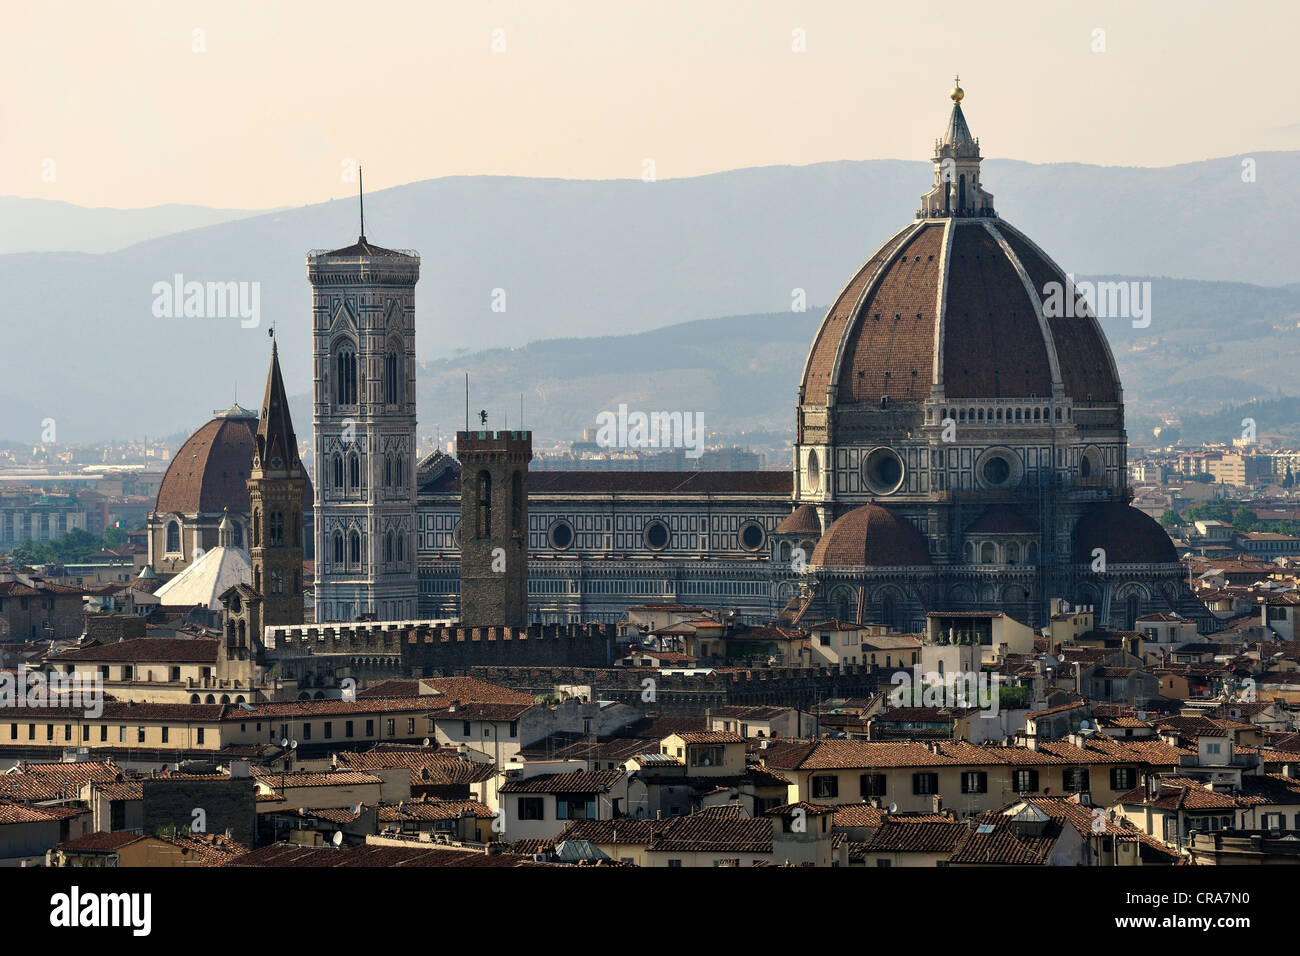 Duomo or Cathedral of Florence and the Campanile, Florence, Tuscany, Italy, Europe Stock Photo